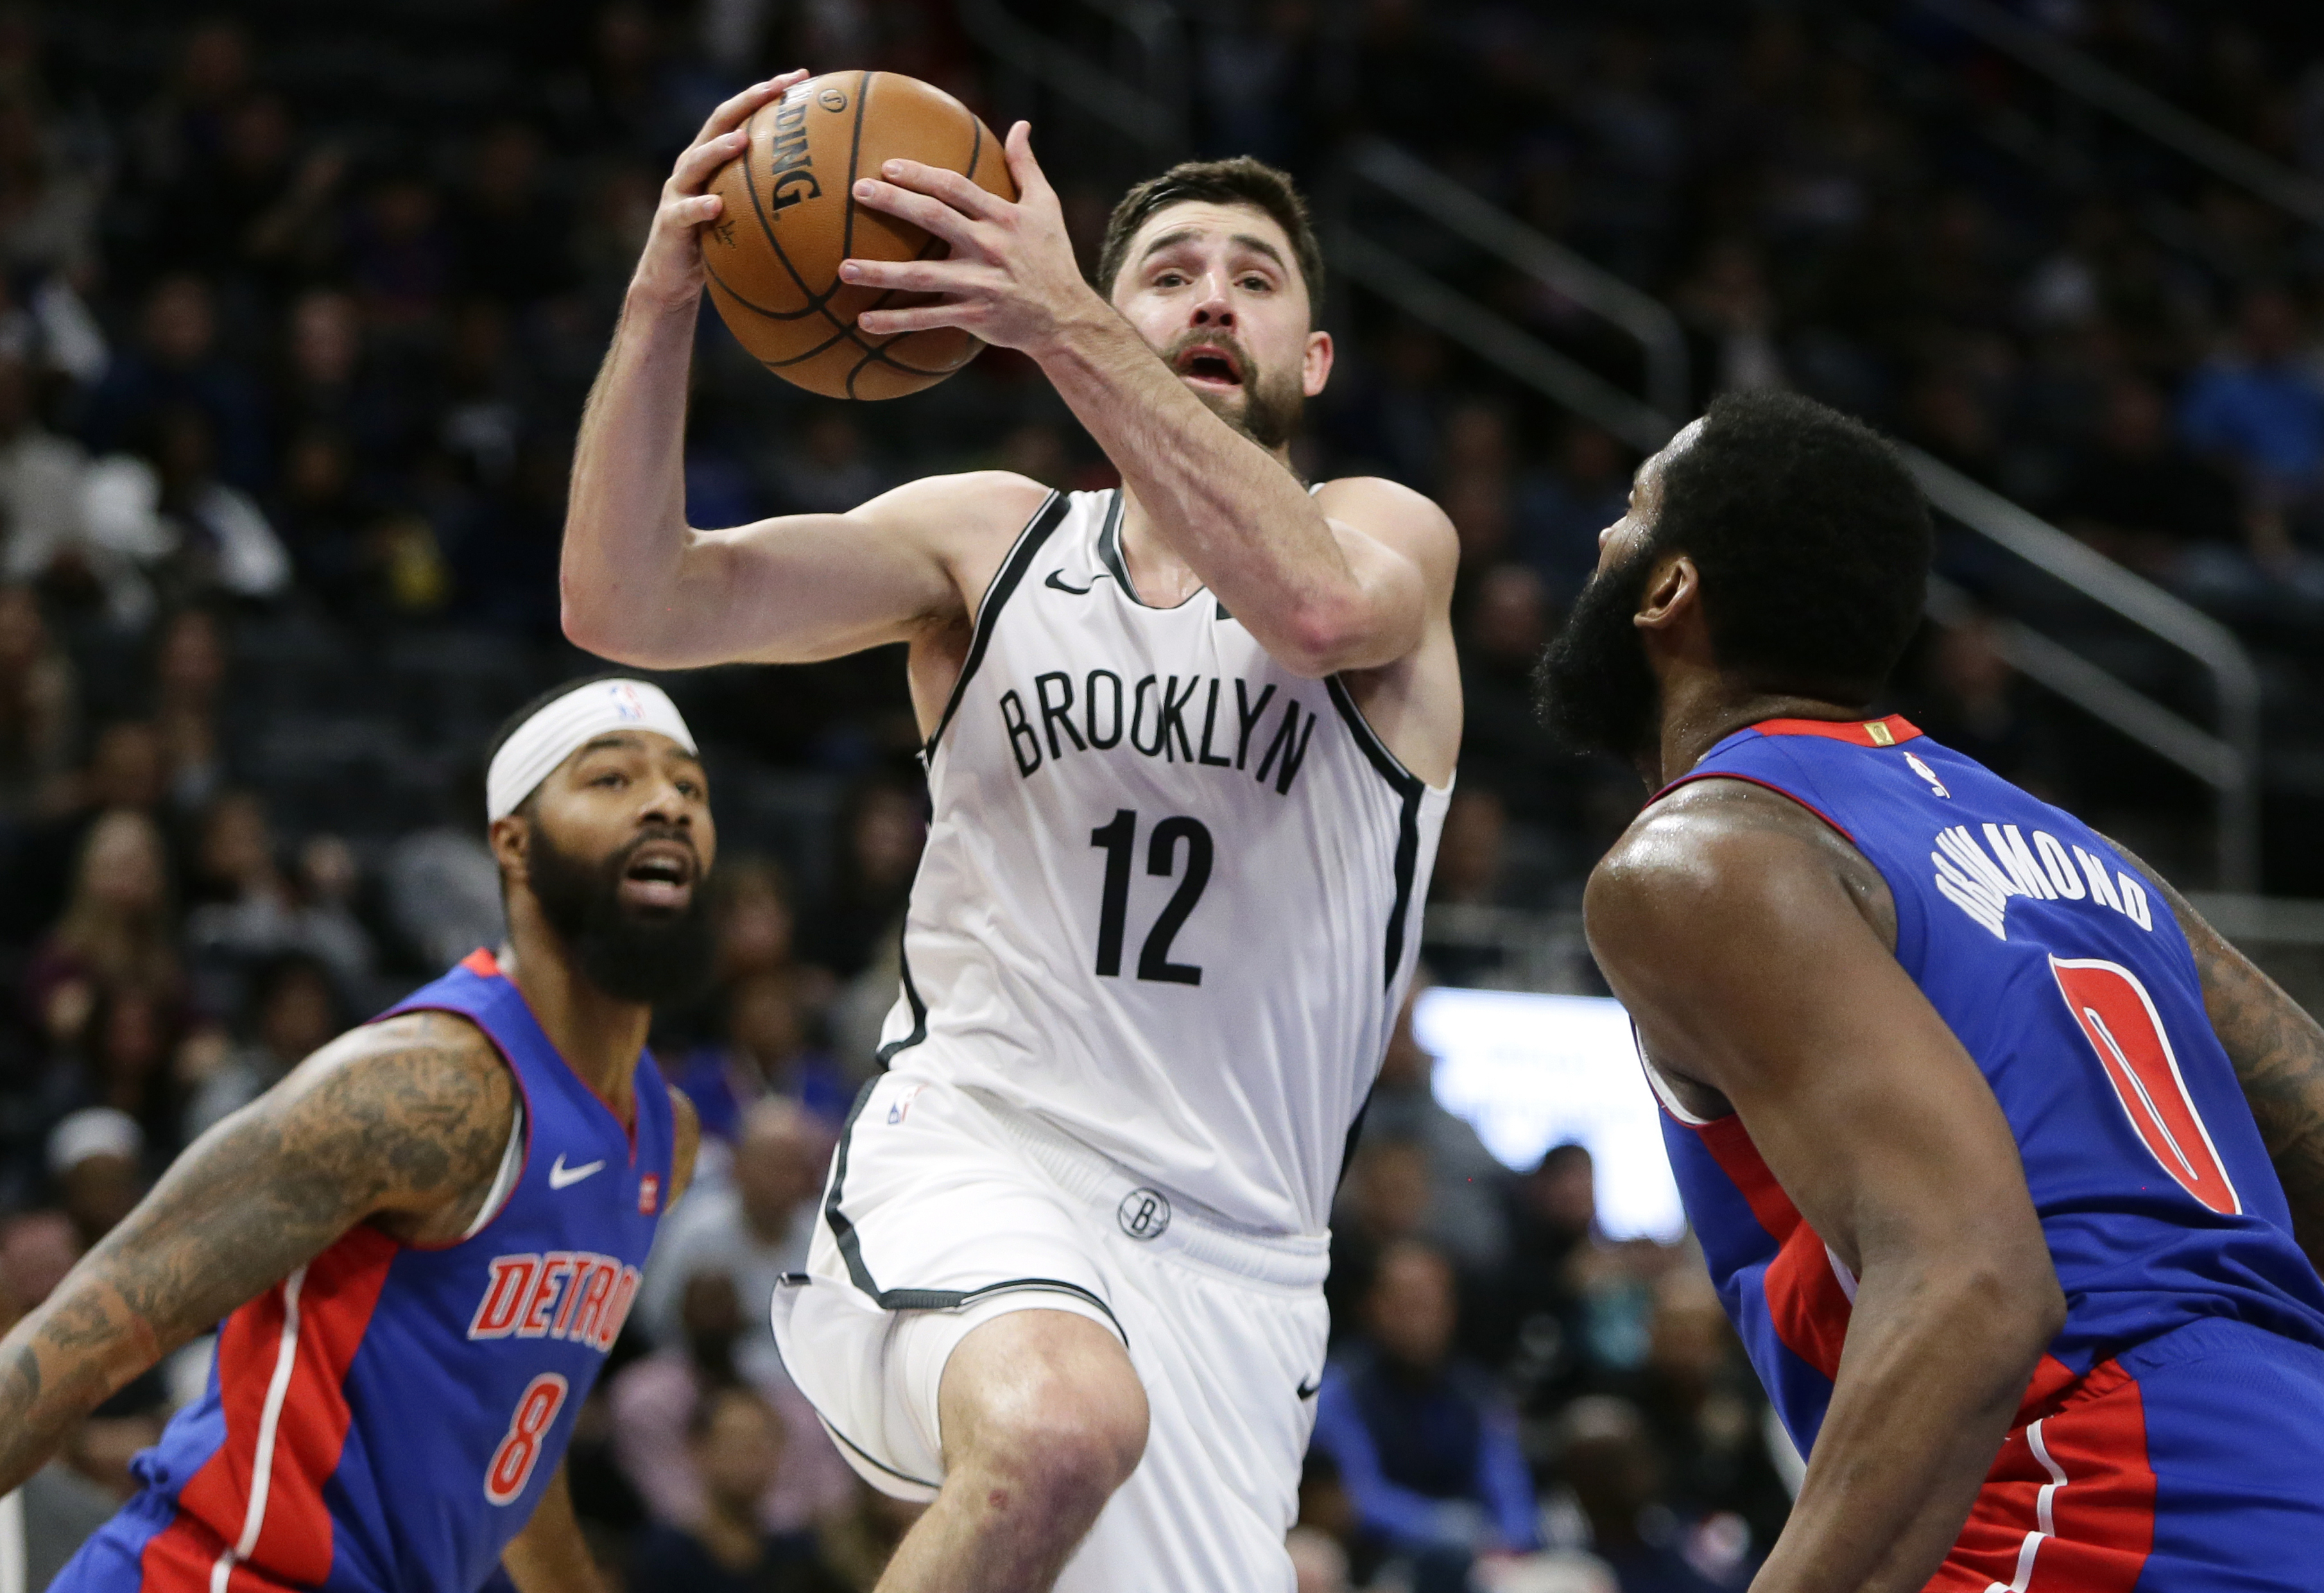 Drummond, Brown lead Pistons over Nets, 113-109